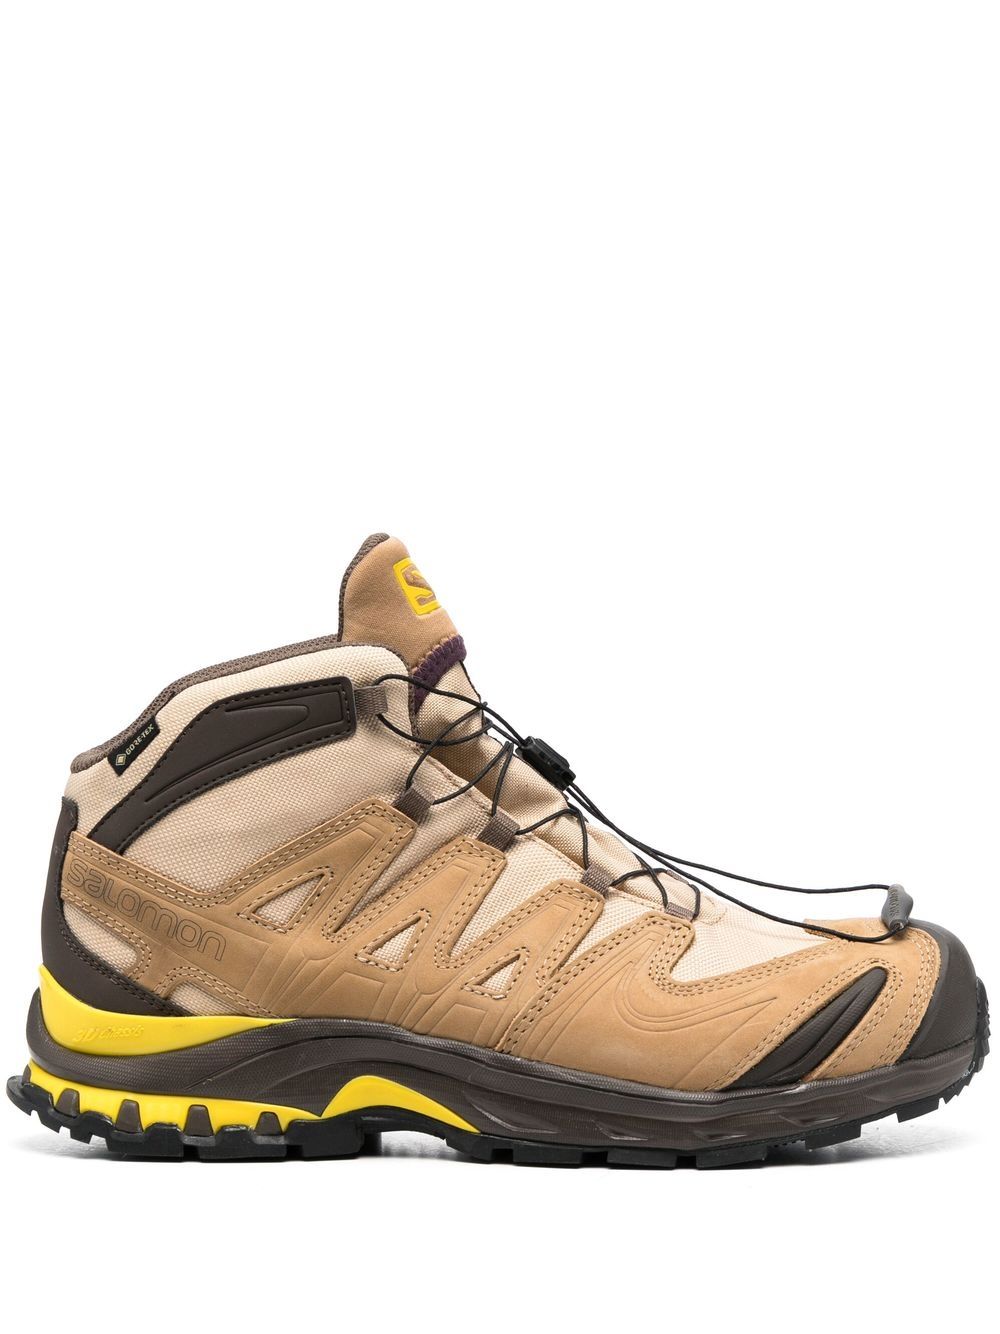 Salomon Better Gift Shop Xa Pro 3d Gore-tex®, Leather And Rubber Sneakers Brown | ModeSens